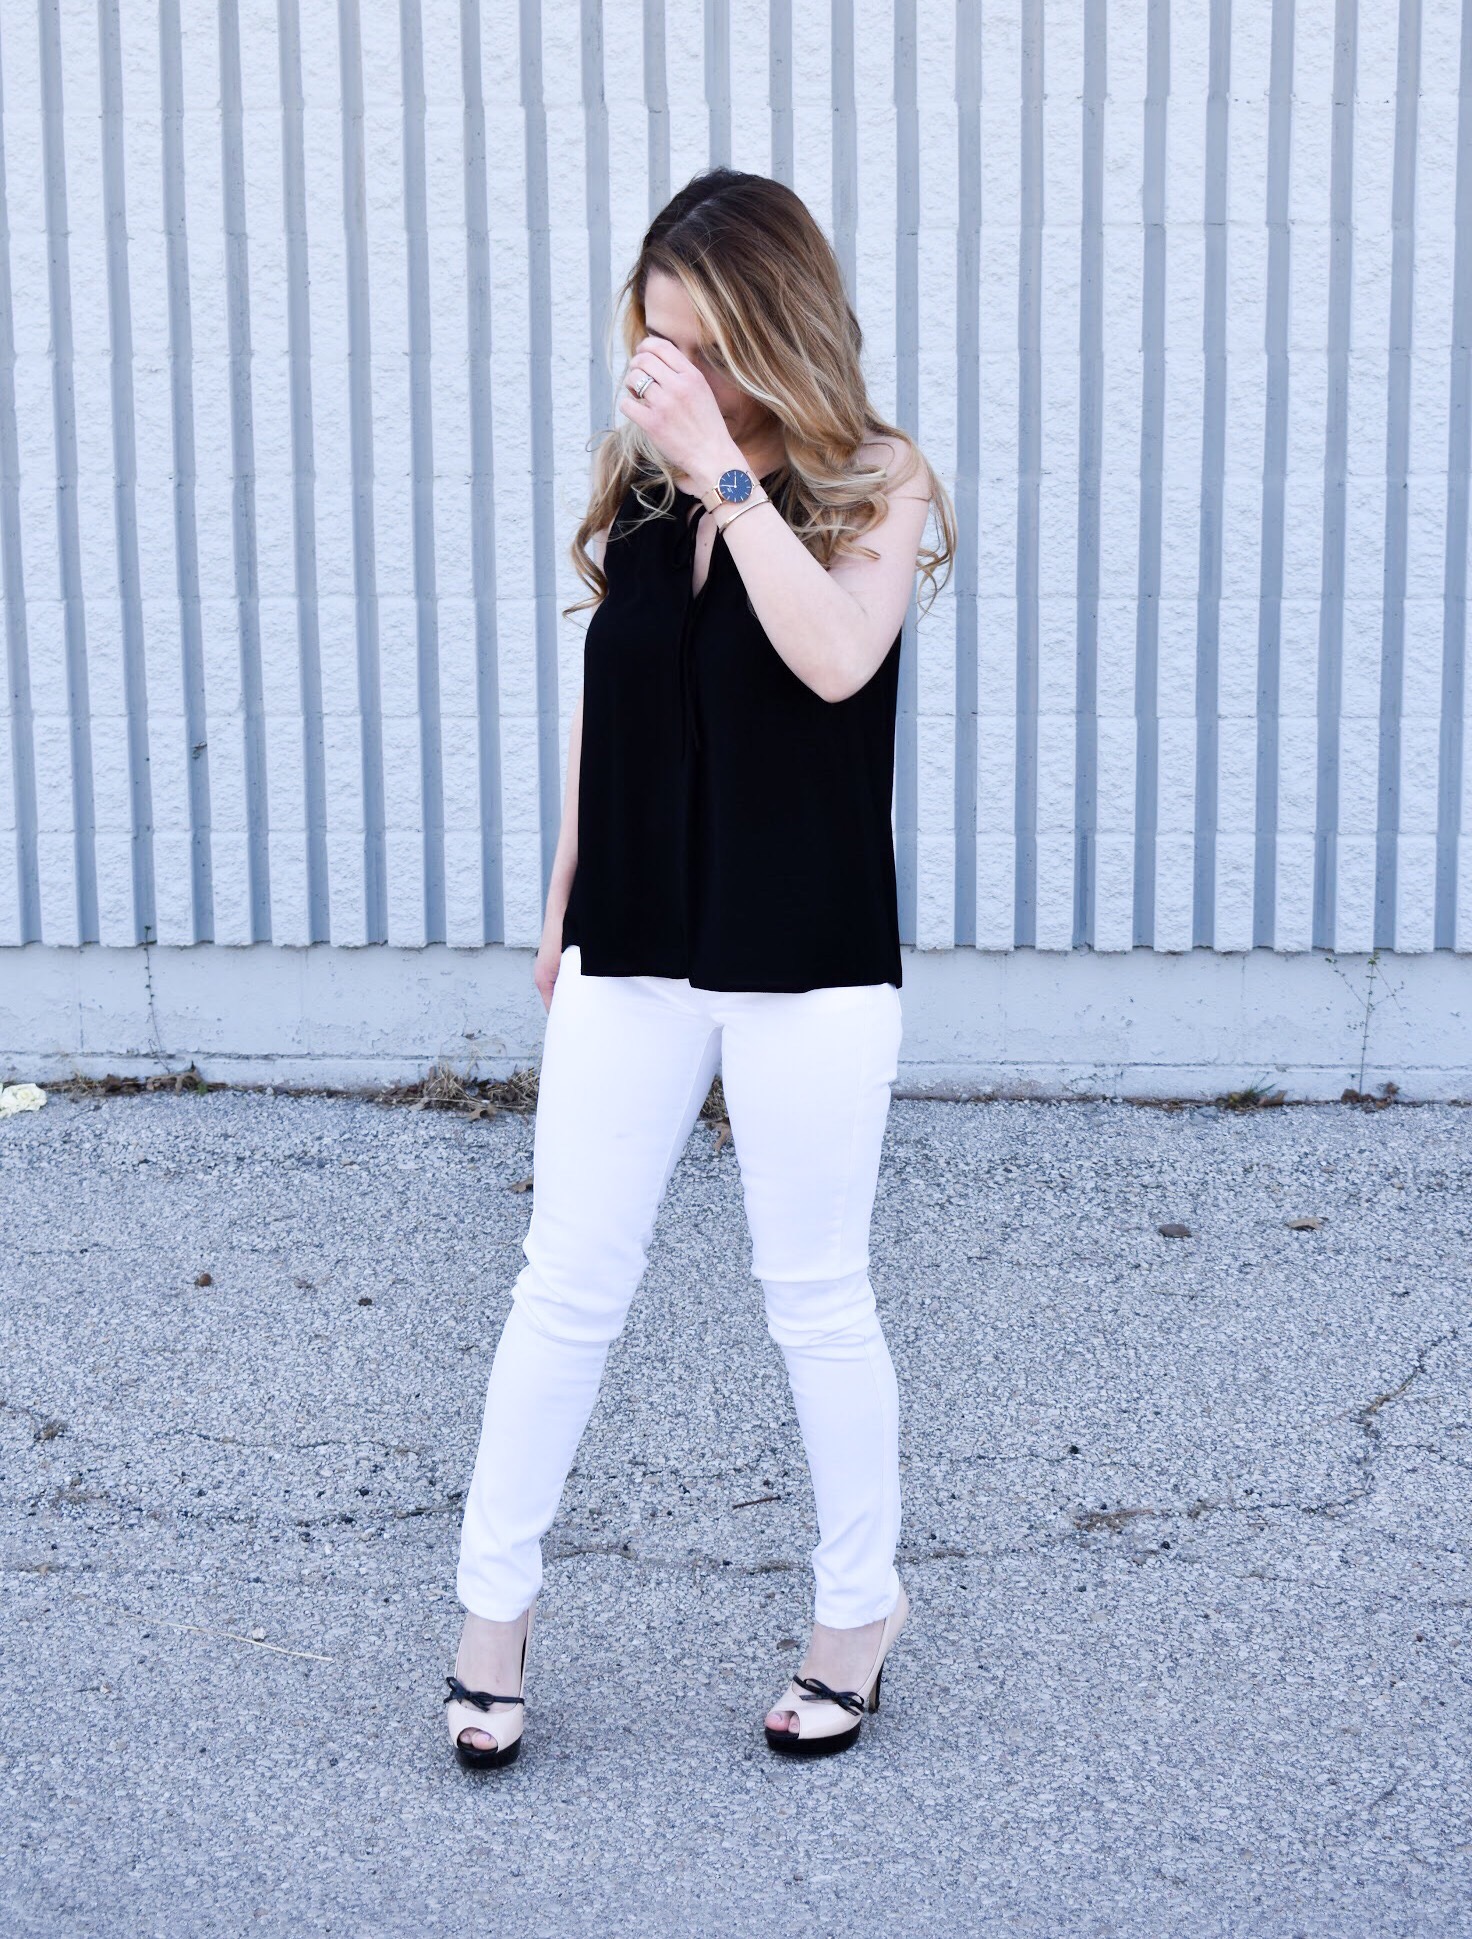 Monochrome Looks for Spring: Some people think you can't wear black and white in the spring. Those people are wrong. Fashion blogger COVET by tricia showcases a springtime monochrome look featuring Banana Republic Stay White Denim and a Tyche black halter top. Minimalist jewelry completes the look. Monochrome is trending for spring 2018, so here's how to effortlessly incorporate it into your wardrobe.